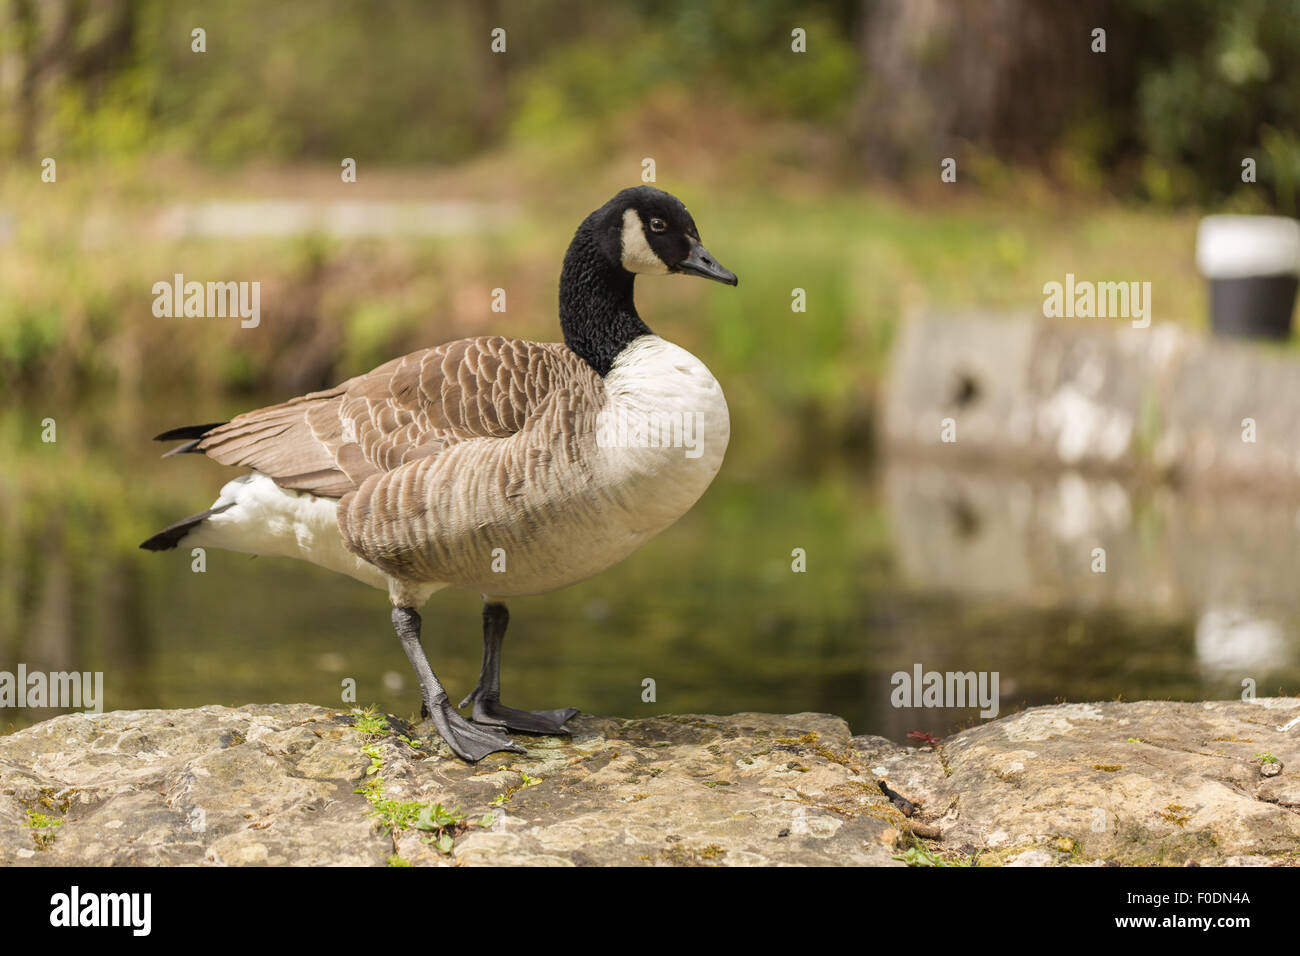 Canada Goose standing just watching, ready on the edge of the water. Stock Photo